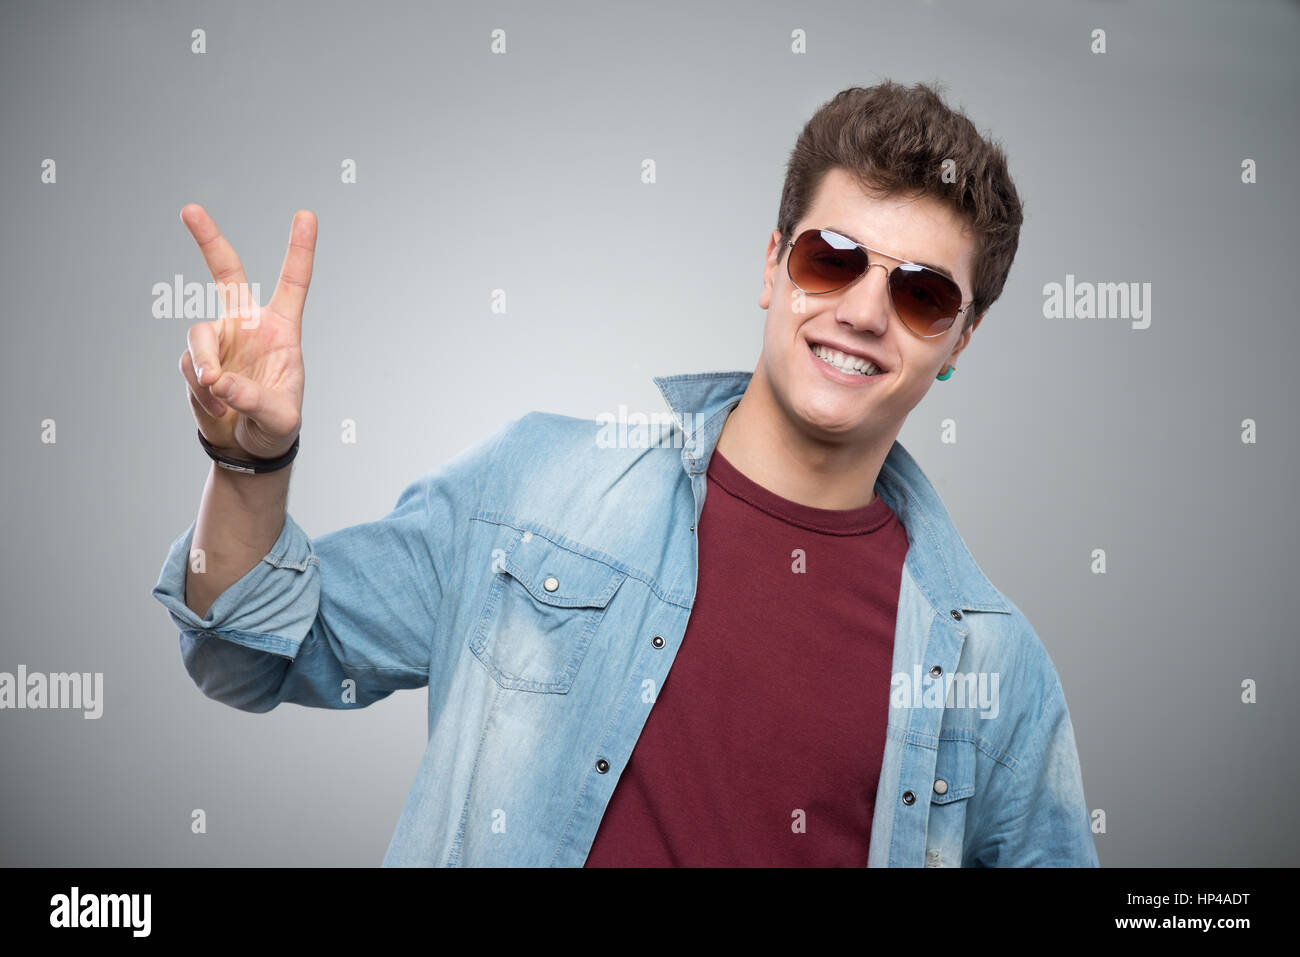 Cheerful cool guy in sunglasses making V sign on gray background Stock Photo